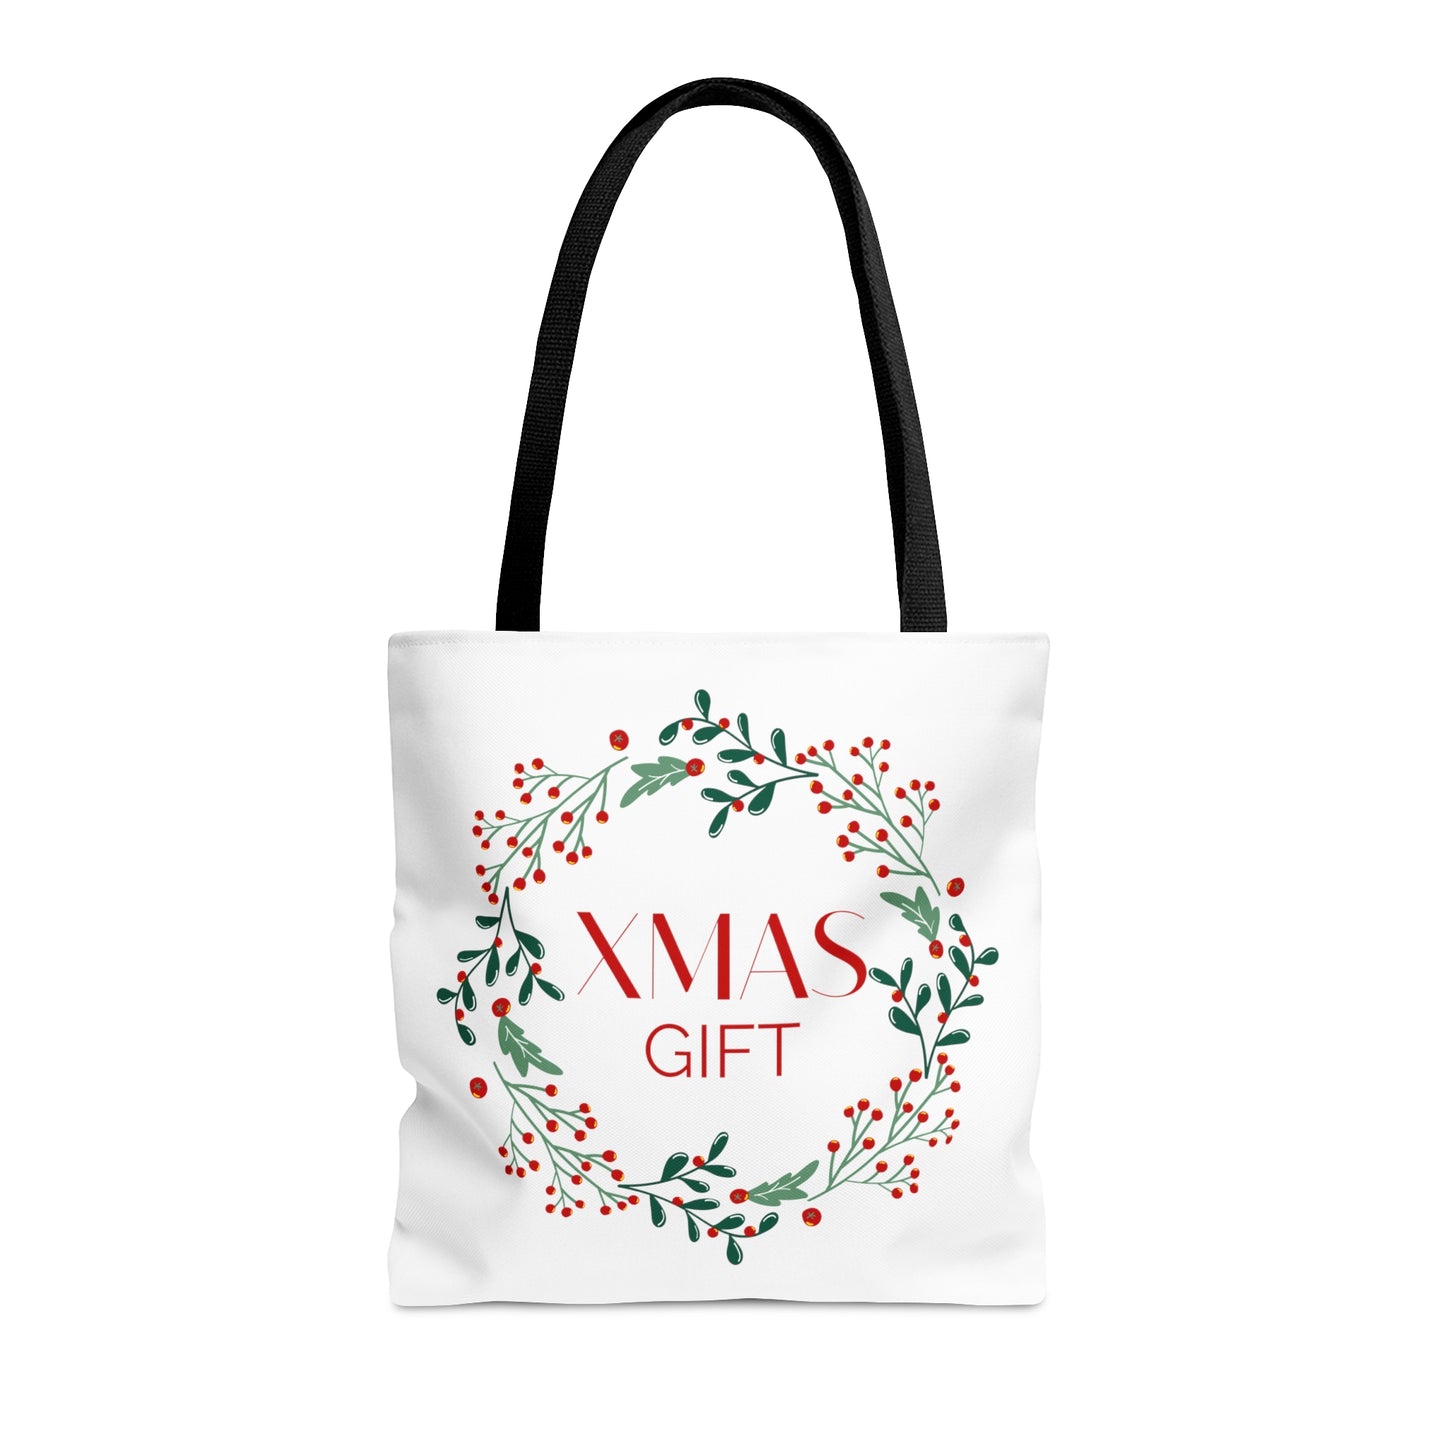 Xmas Gift Printed Canvas Tote Bags for Her and Him